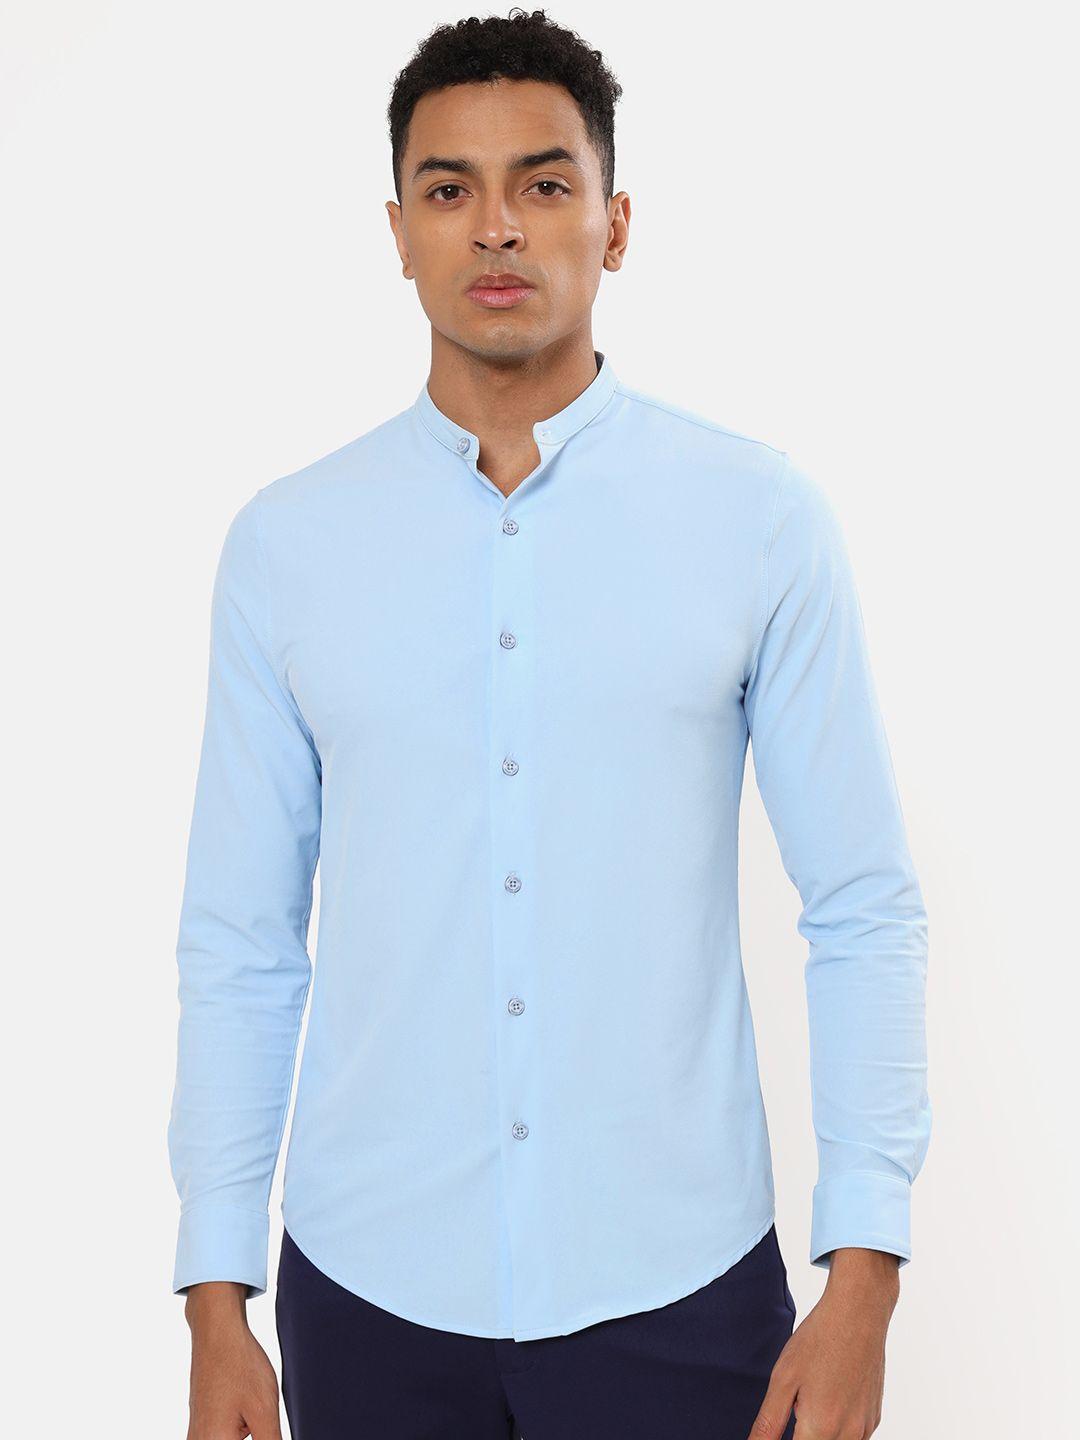 cultsport-men-band-collar-slim-fit-move-with-ease-casual-shirt